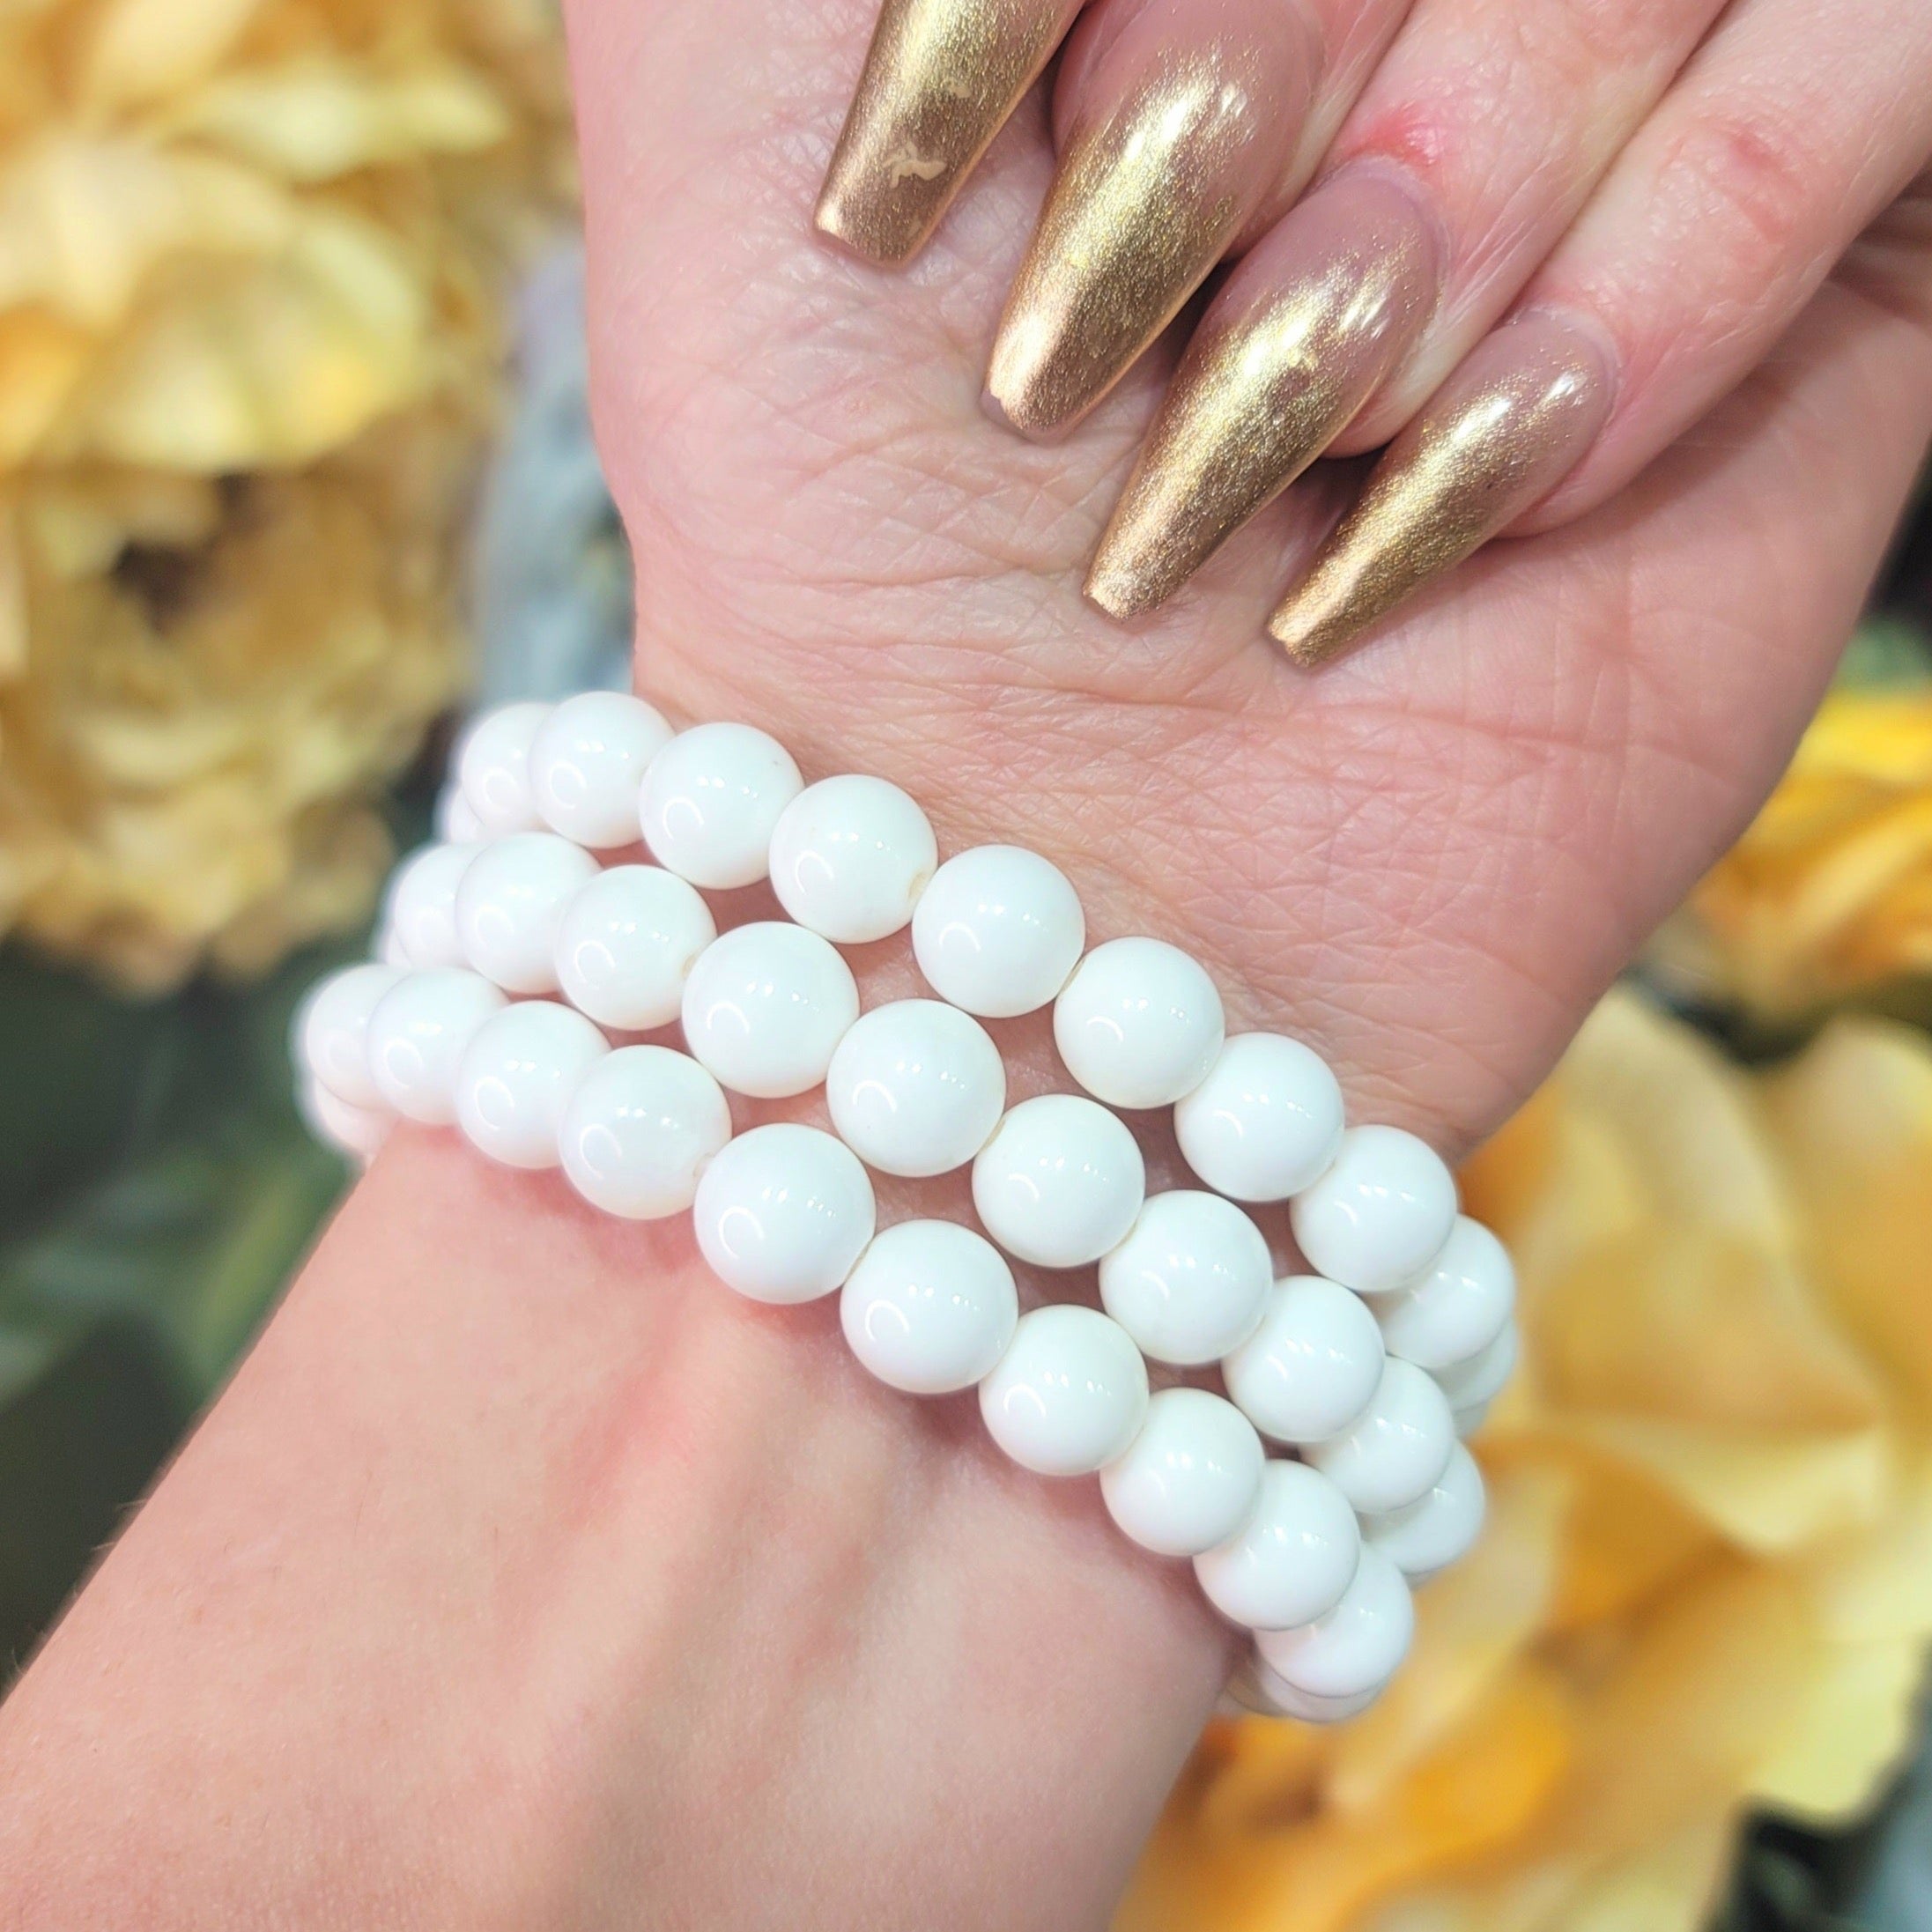 Tridacna Shell Bracelet for Anti-Aging, Healthy Metabolism and Protection